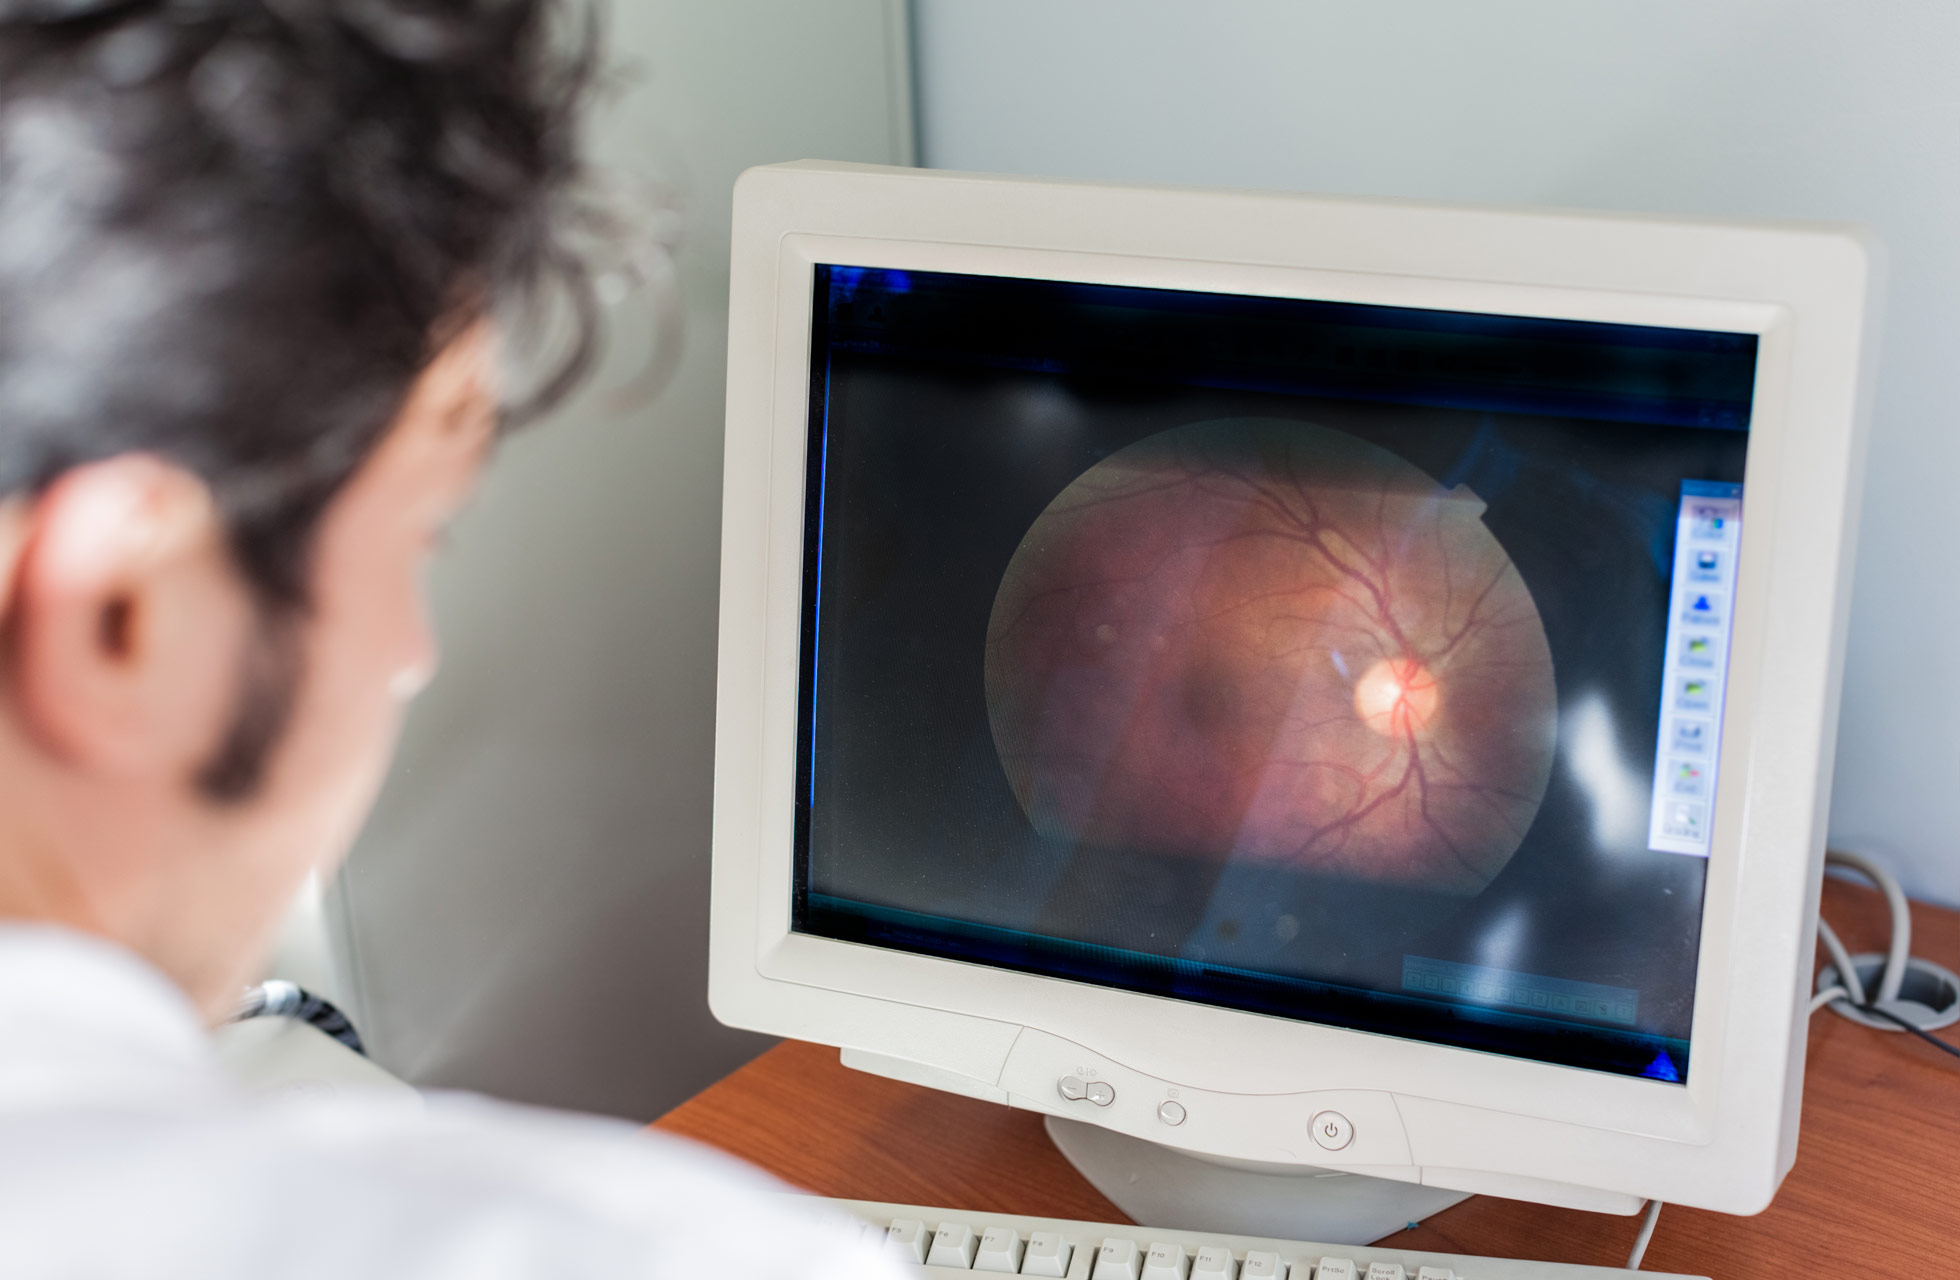 Vitreous Floaters and Laser Treatment